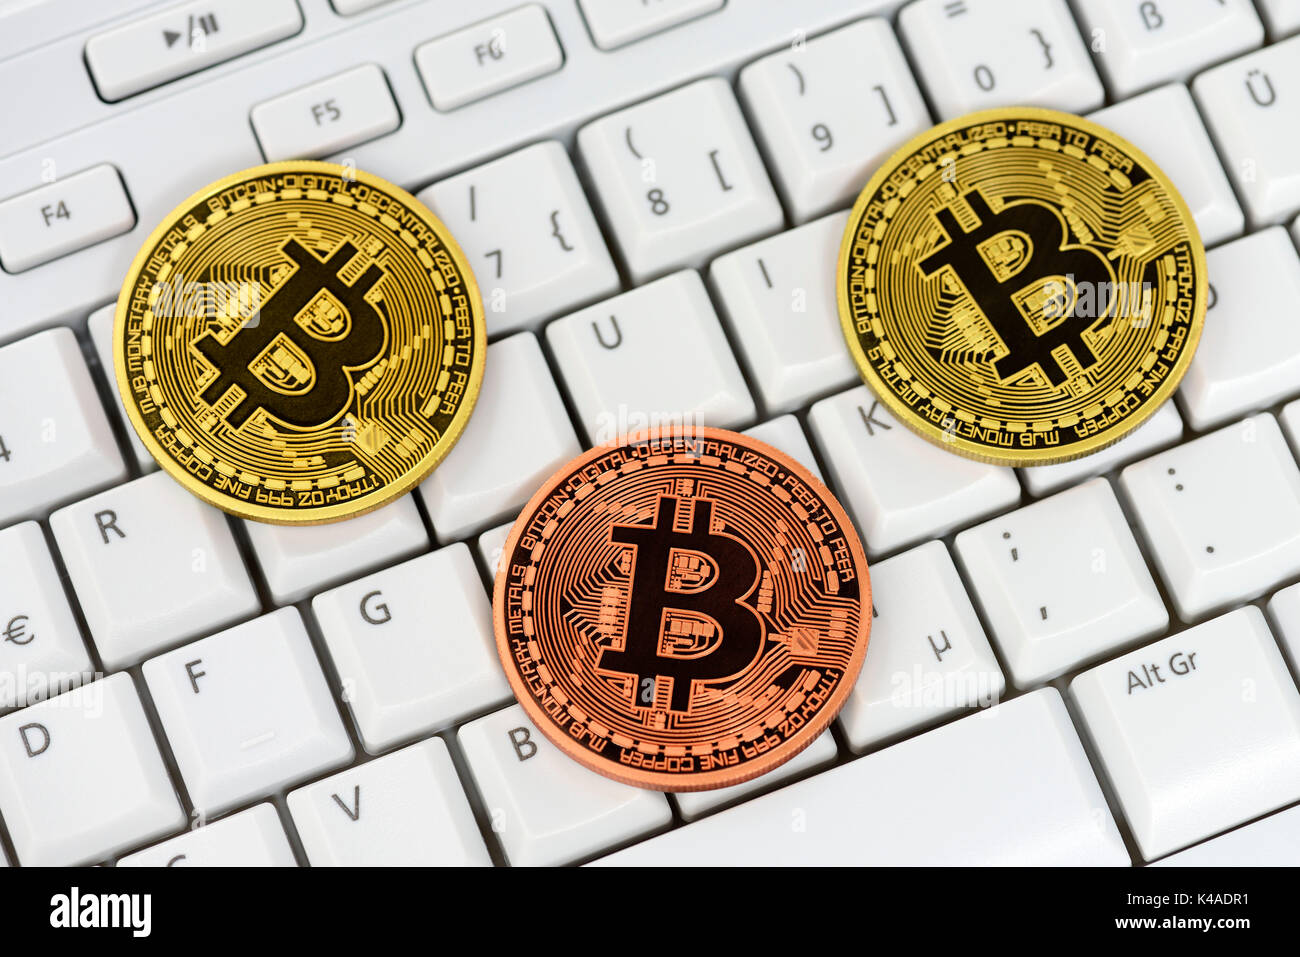 Bitcoins On Computer Keyboard, Virtual Currency Stock Photo